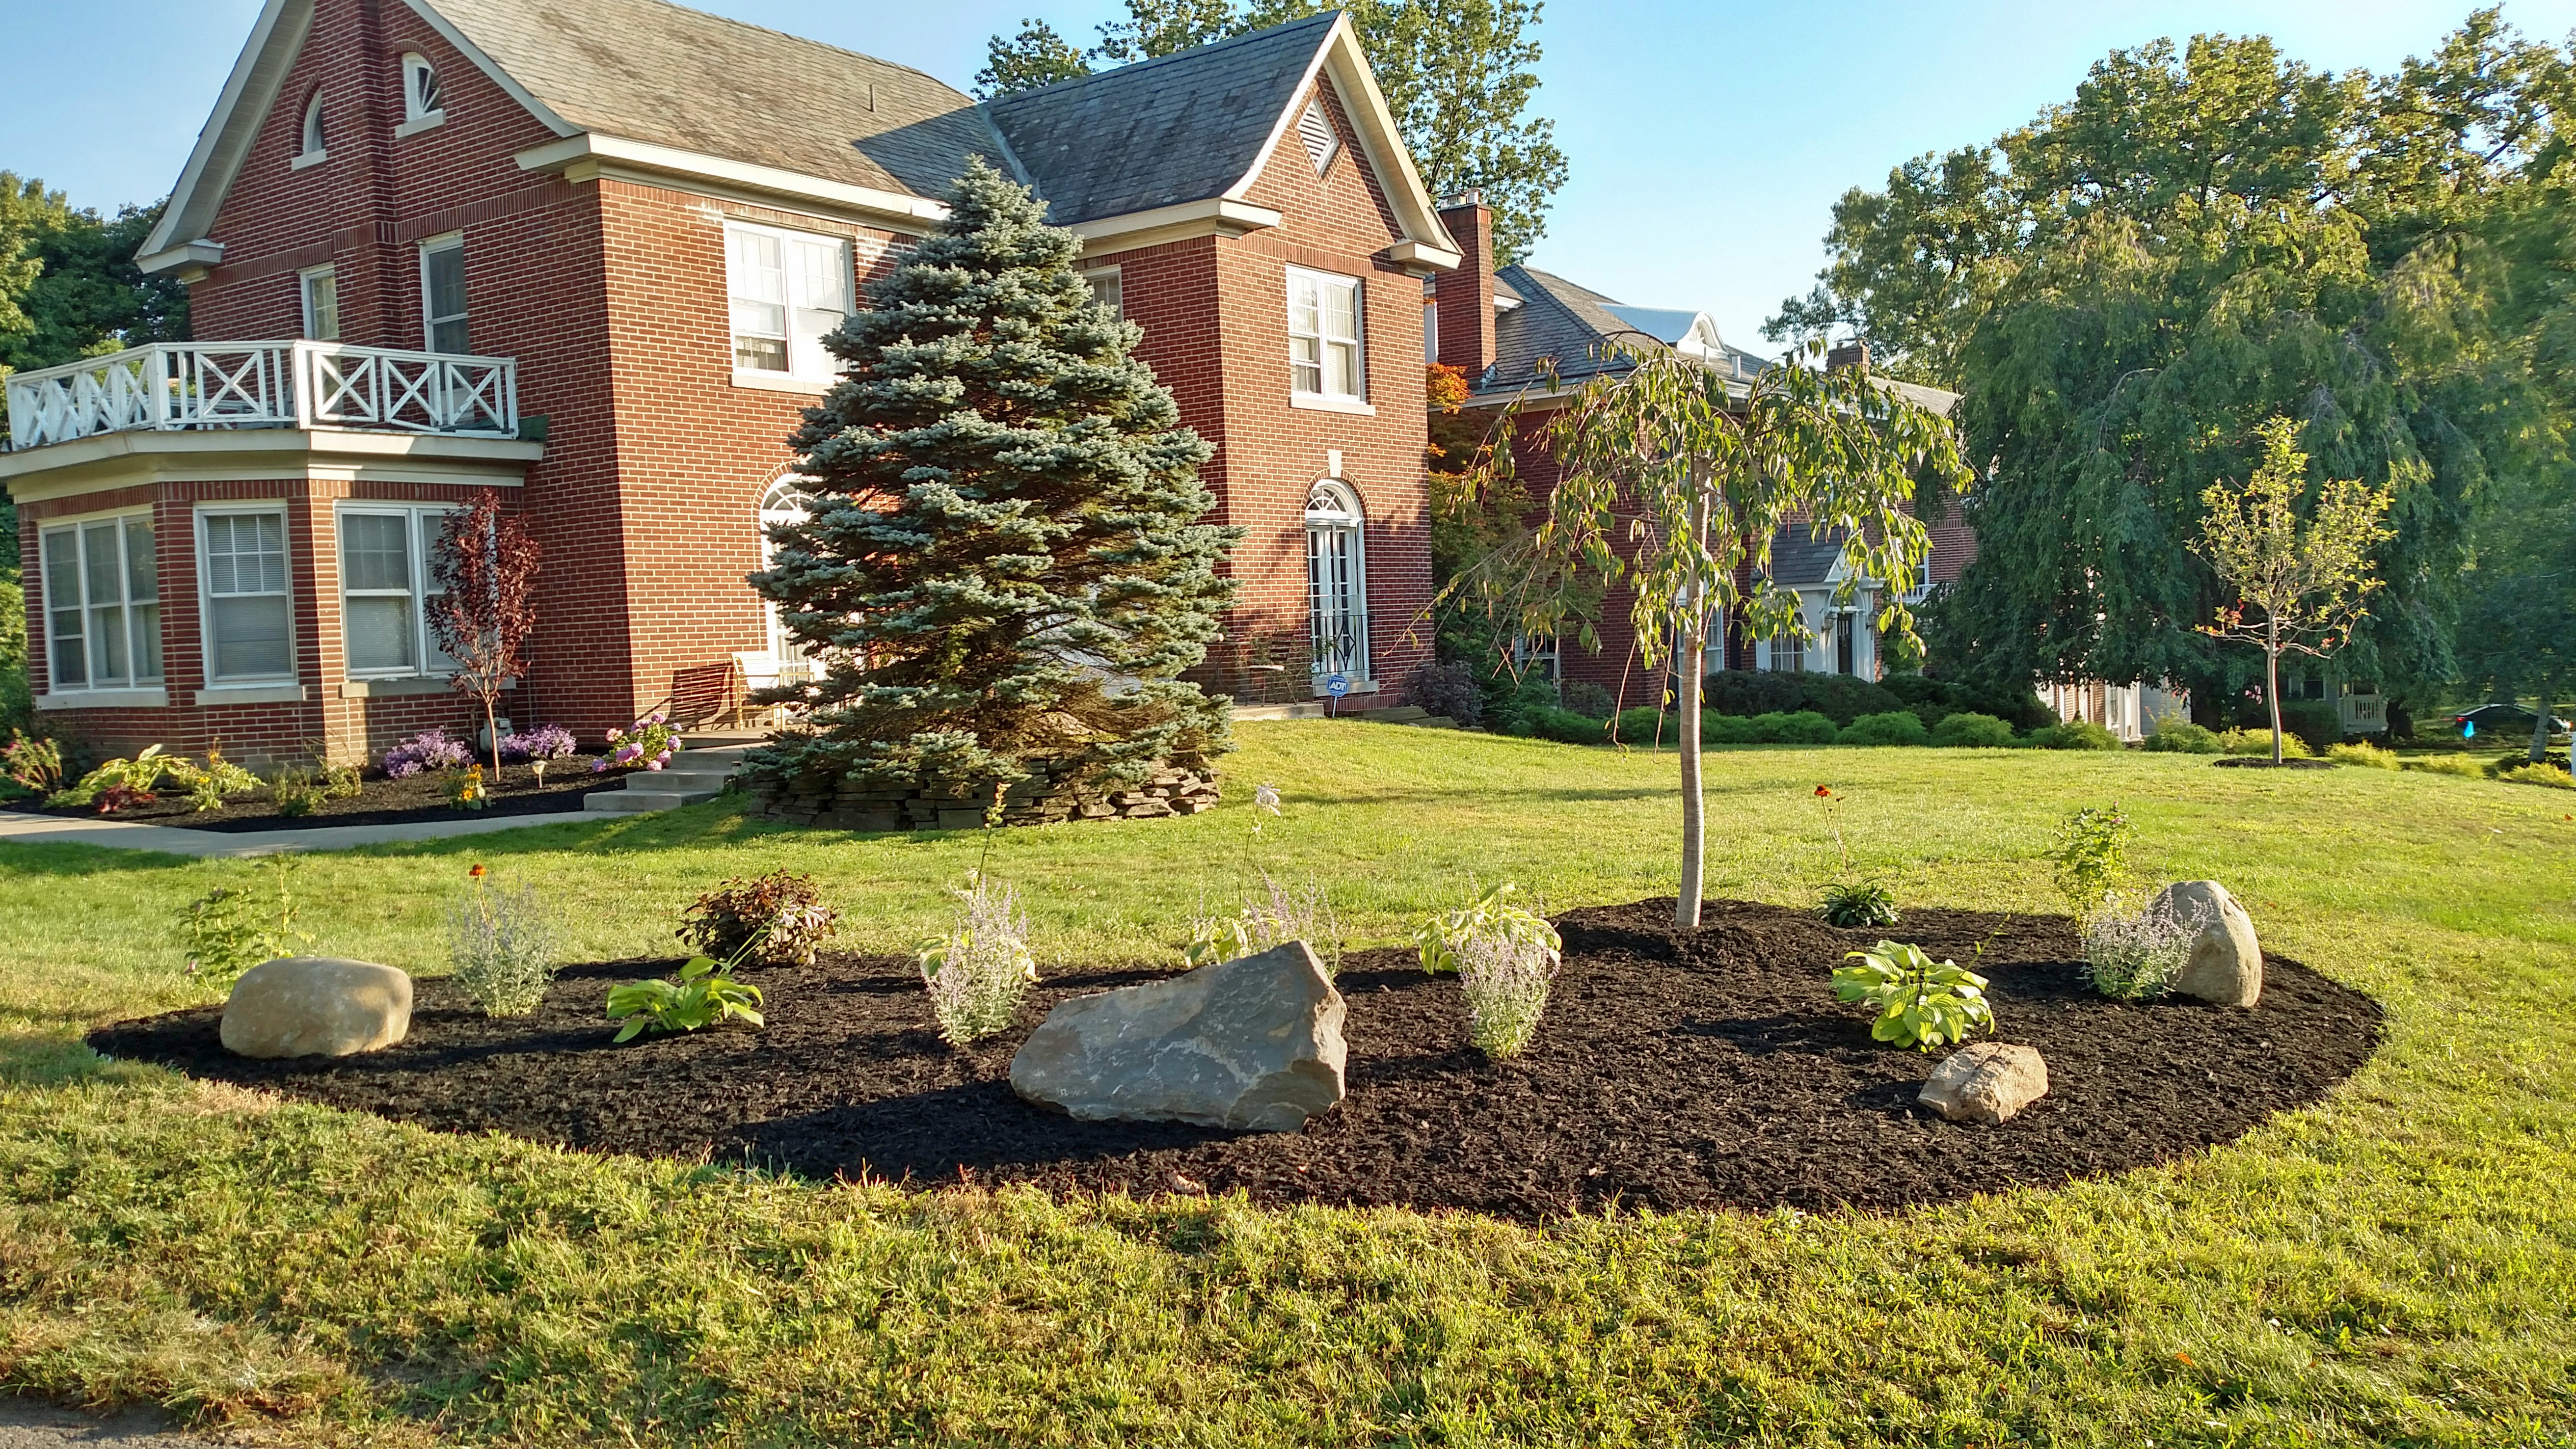 Thumbnail of after image of completed plant bed with mulch, stone, and newly planted trees